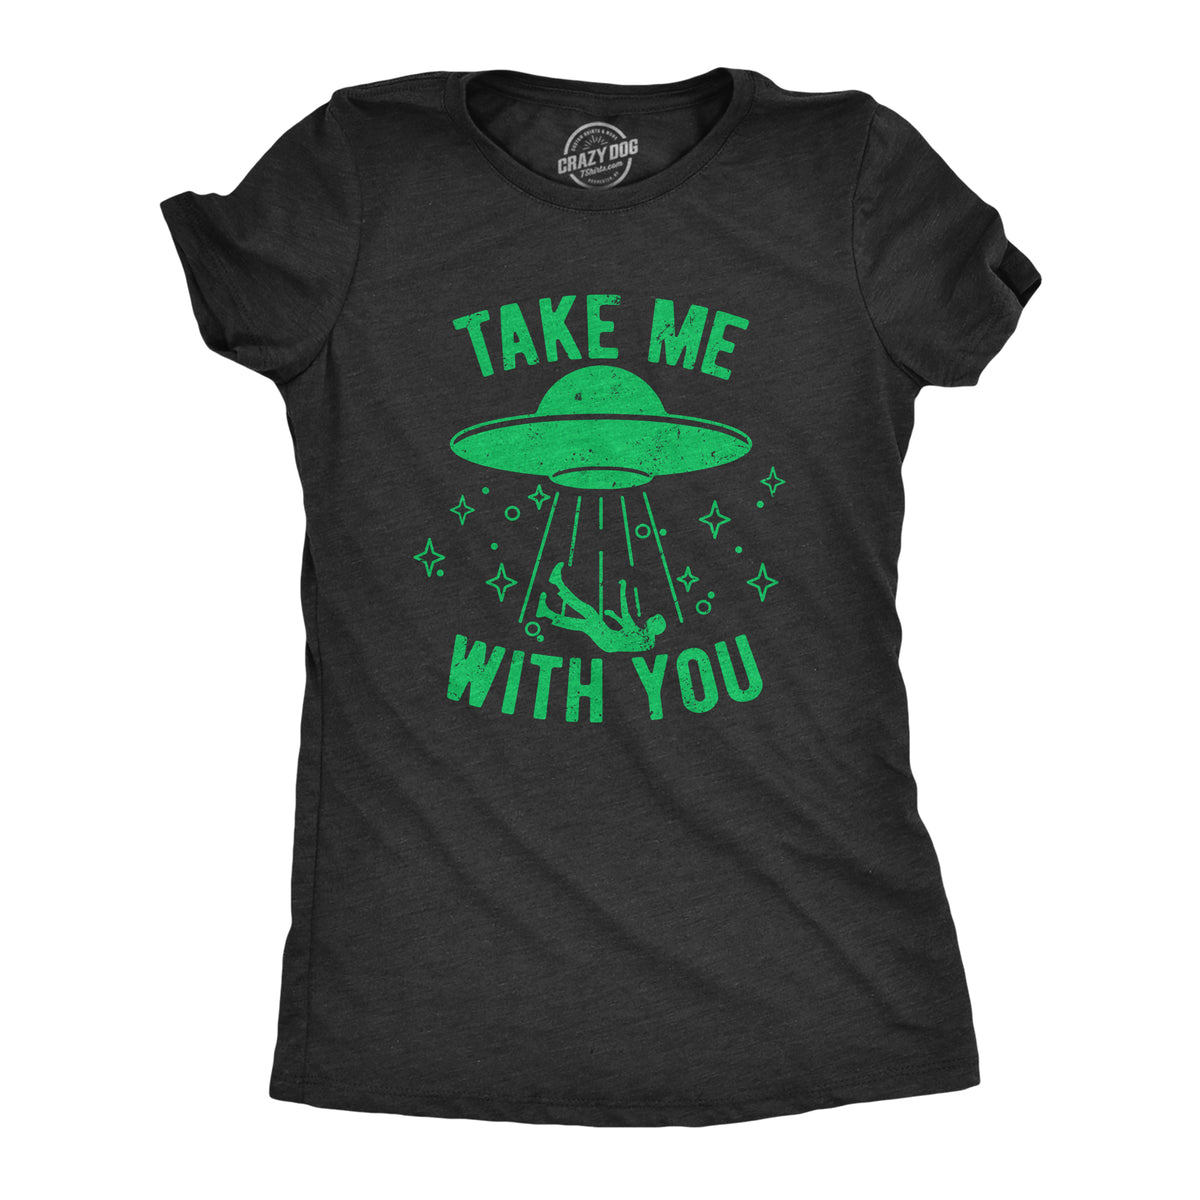 Funny Heather Black - TAKE Take Me With You Womens T Shirt Nerdy Sarcastic Tee